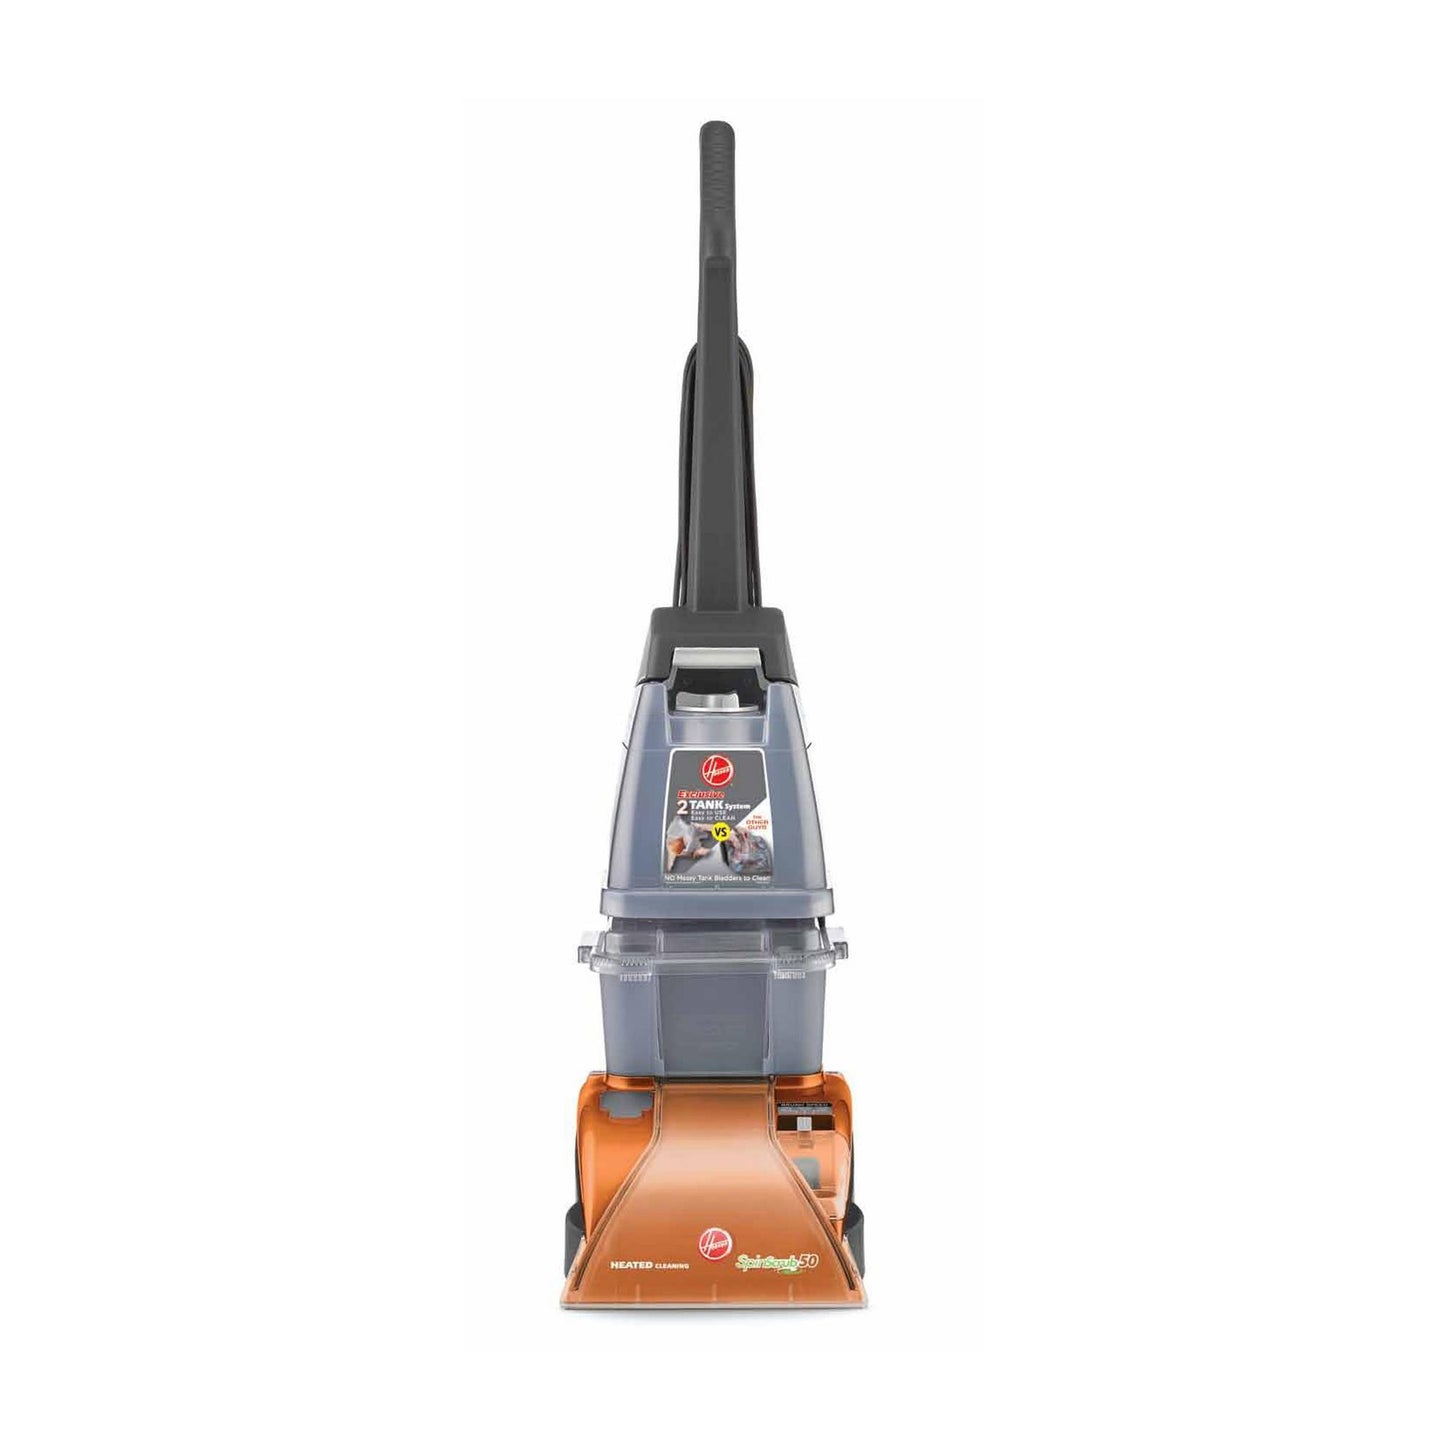 Reconditioned Steamvac Carpet Cleaner